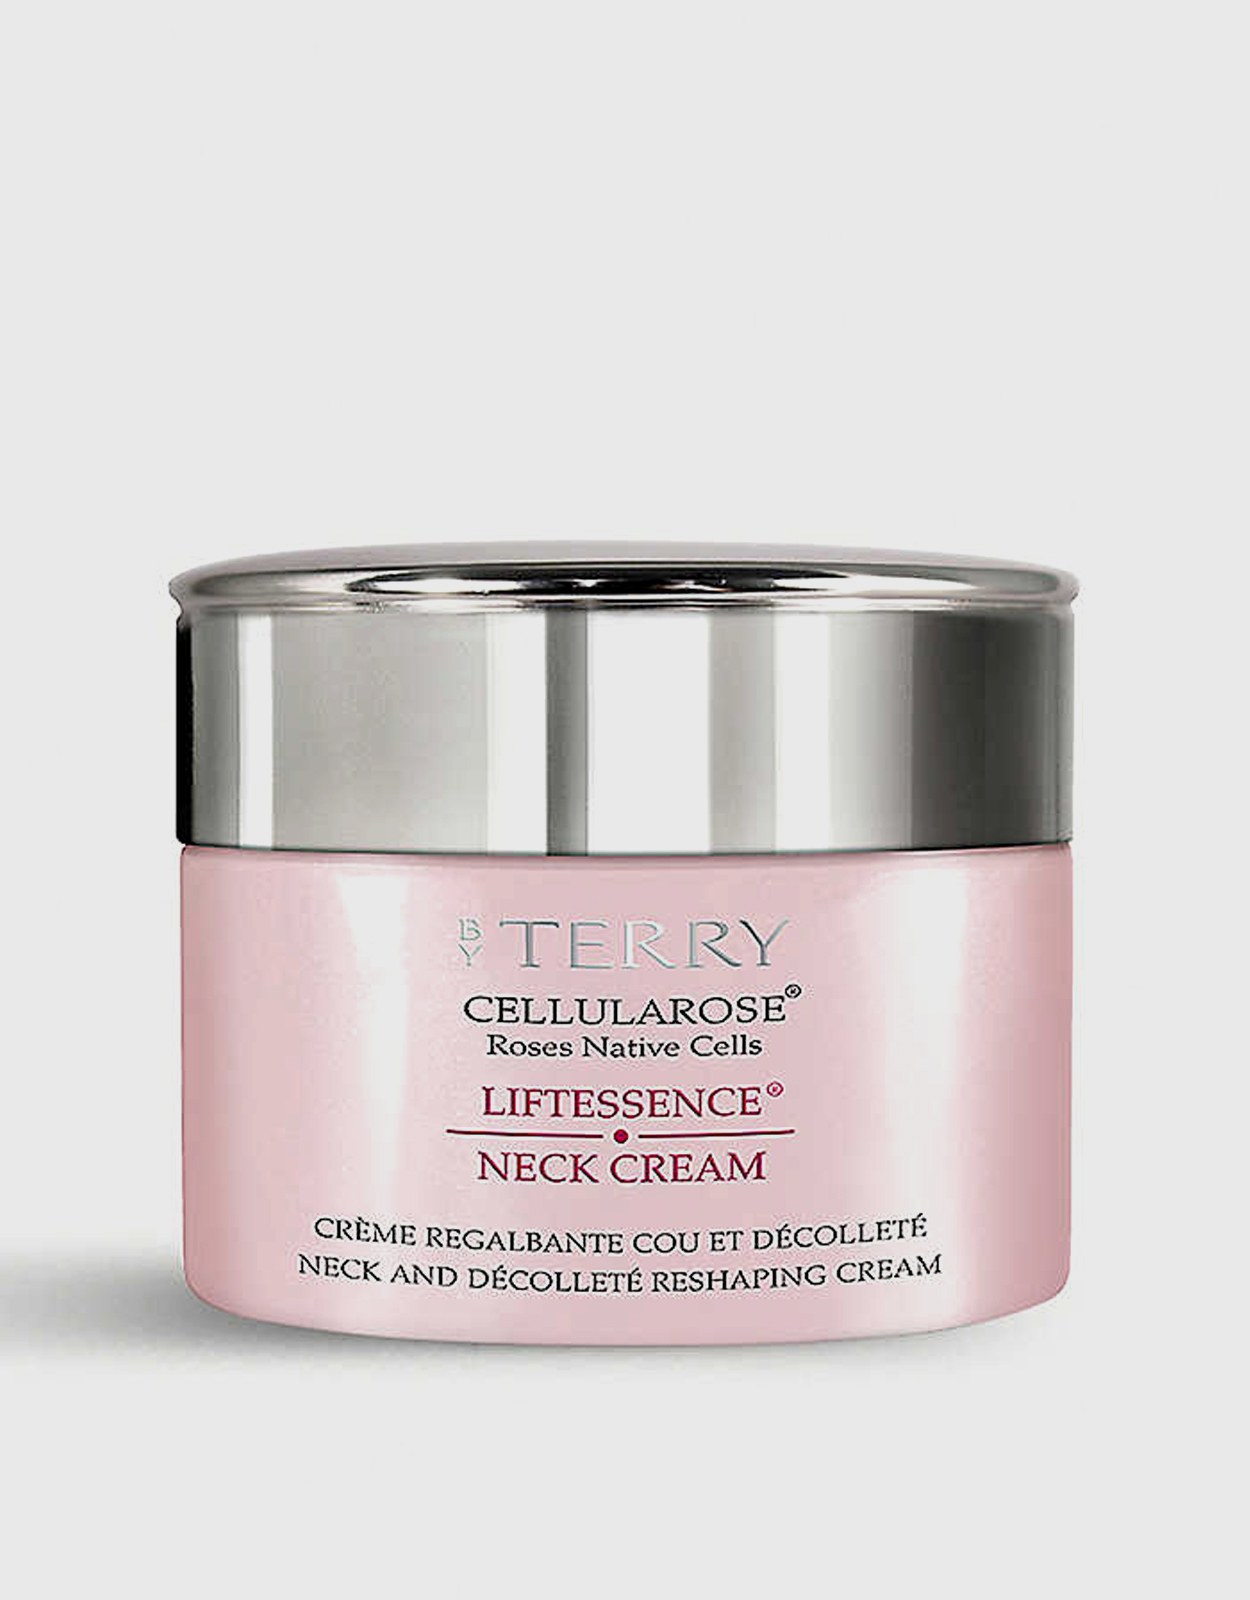 BY TERRY Cellularose Liftessence Neck and Decollete Reshaping Cream 50g  (Skincare,Anti-Aging) IFCHIC.COM